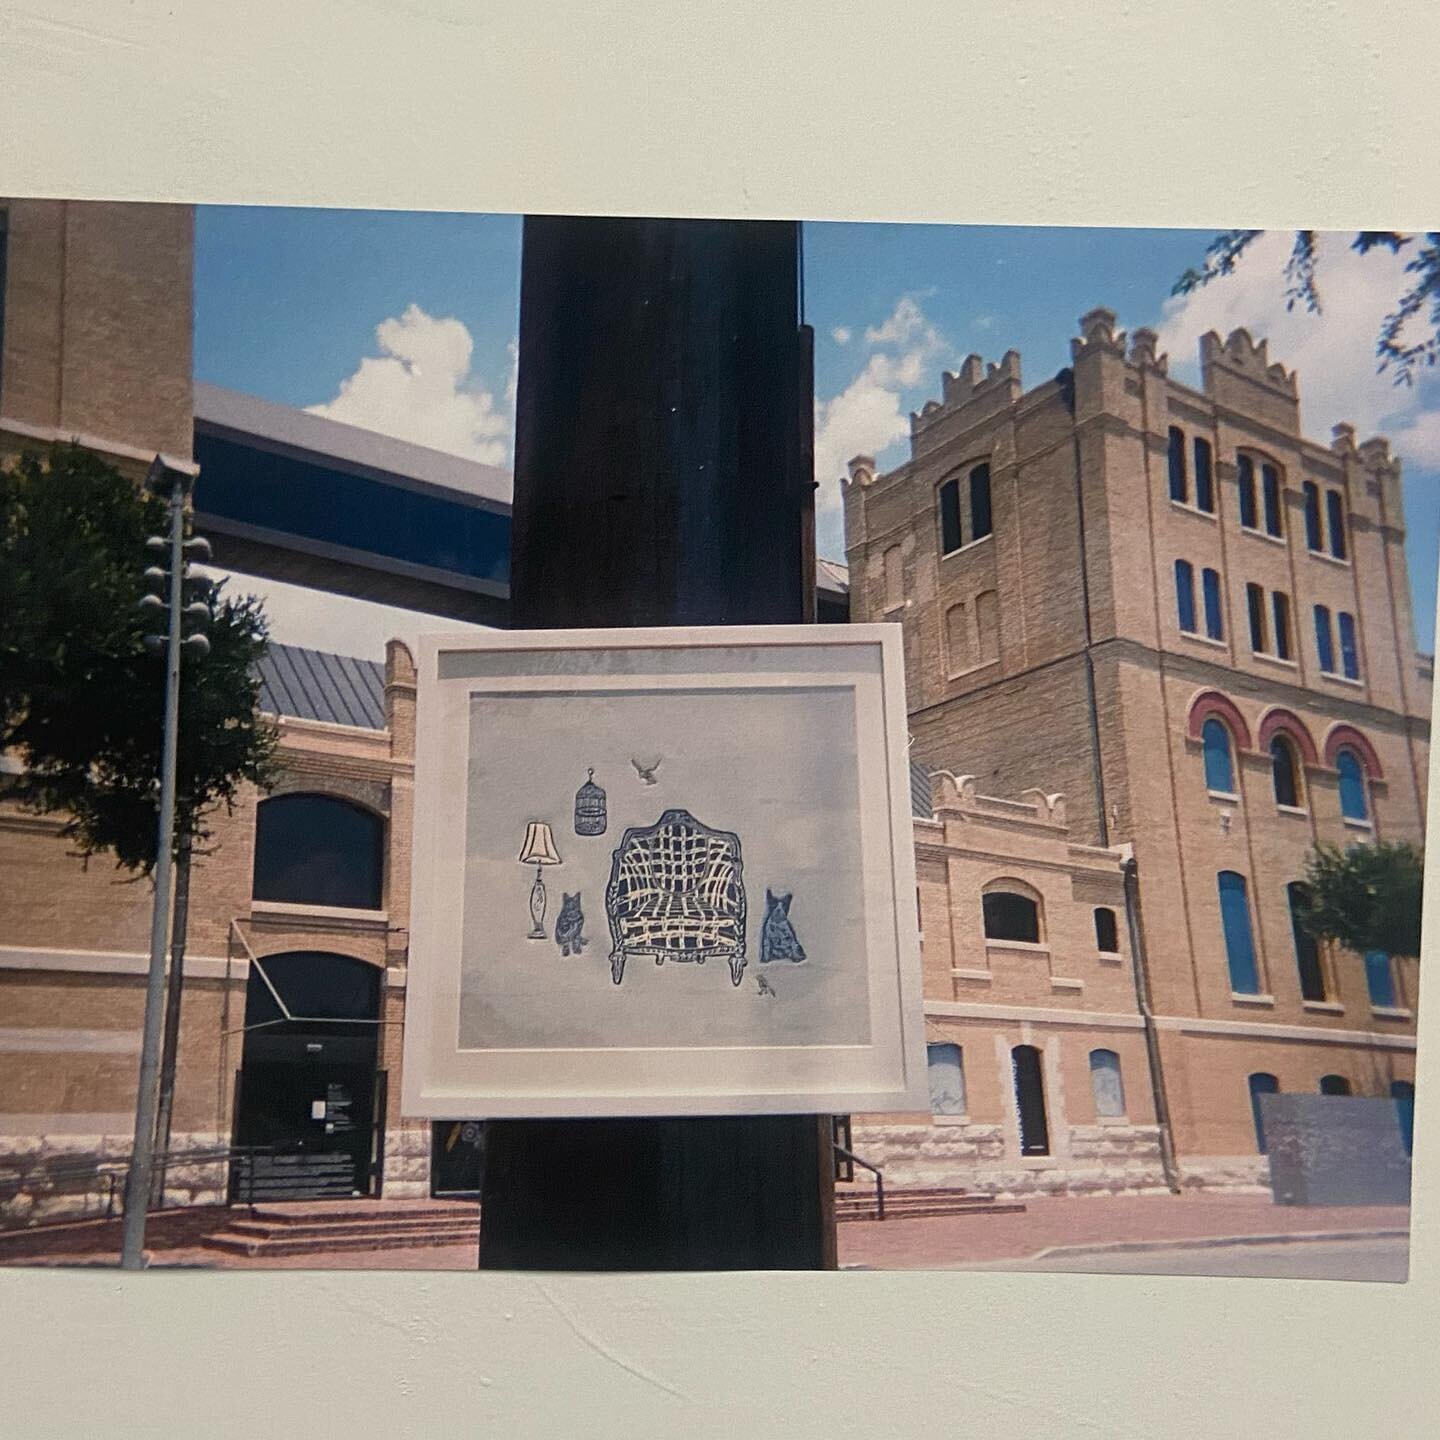 Austin friends! I have a print exhibited at @massgallery in Road Soda: A Texas Road Trip Traveling Exhibition. Come by MASS this Saturday between 12-5pm and check out the show! 

&ldquo;This summer MASS Gallery decided to do things a little different